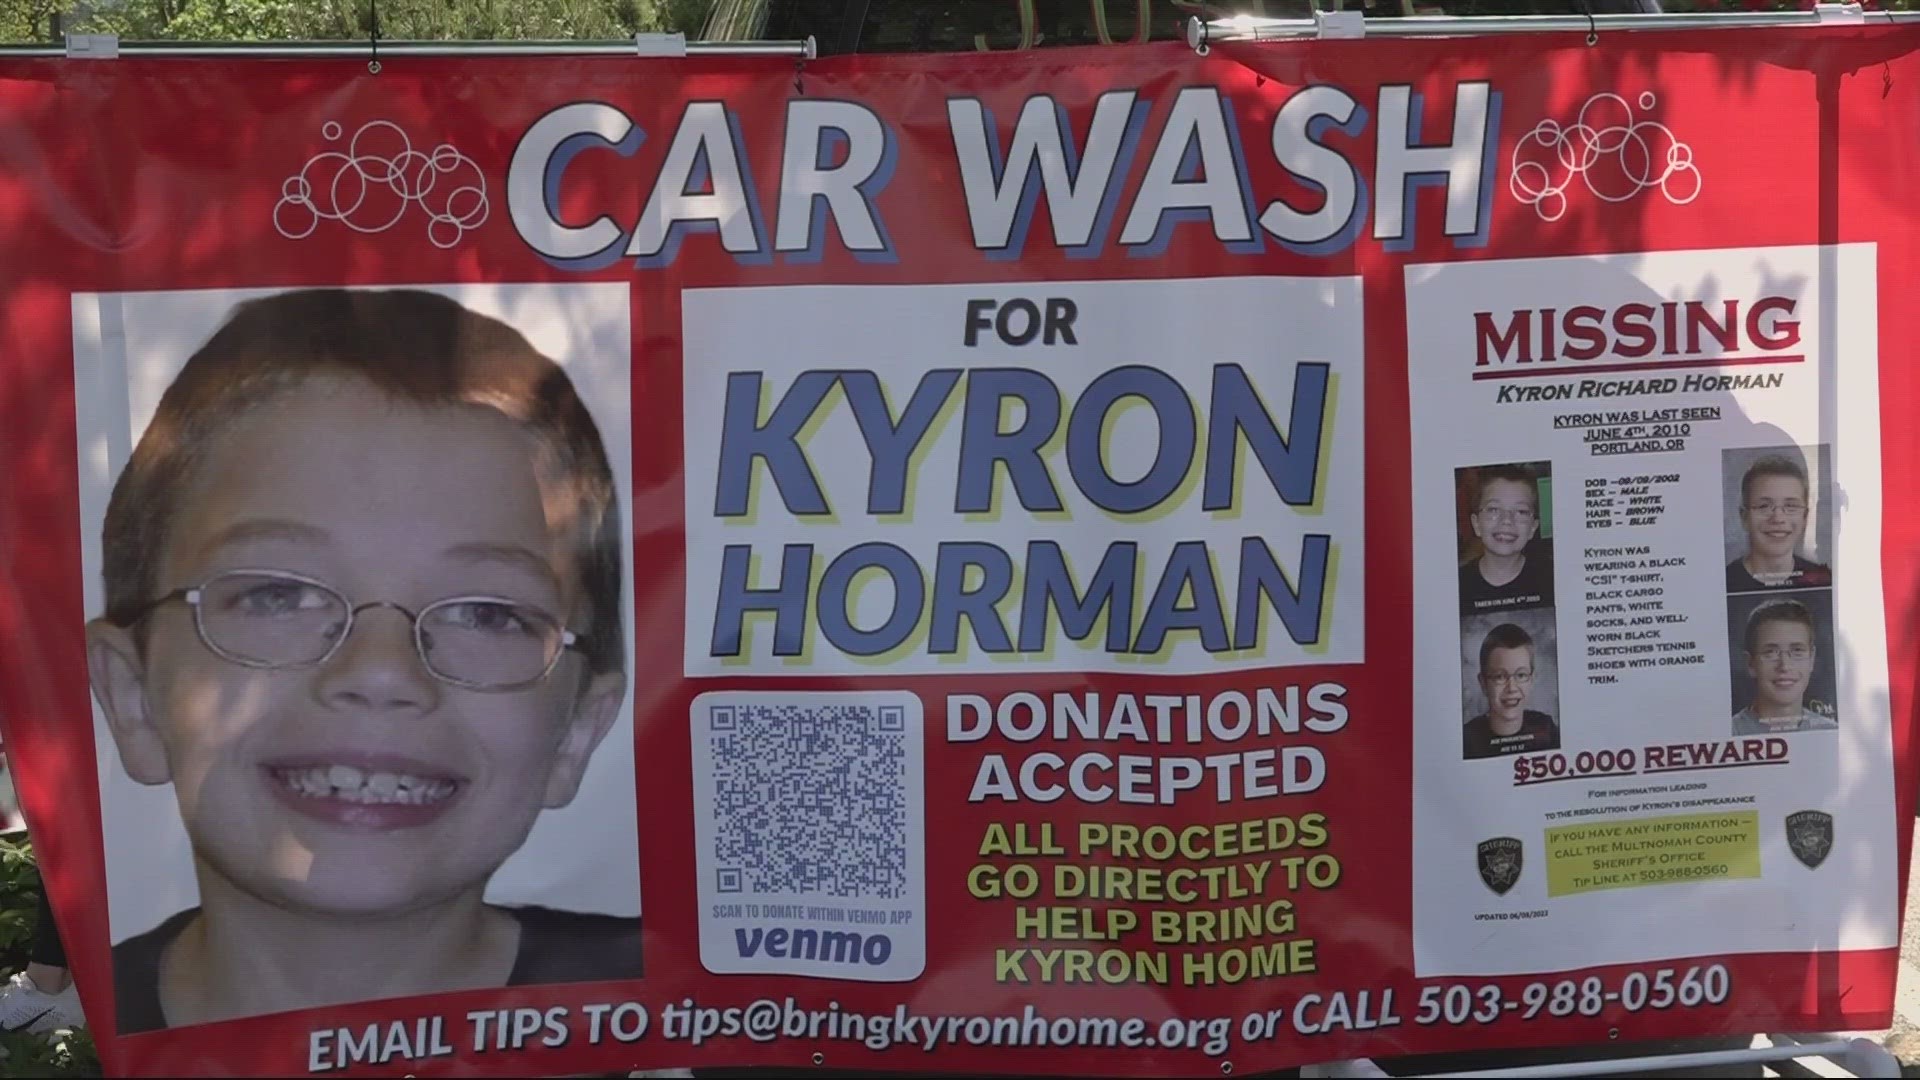 Sunday marks 13 years since Kyron Horman disappeared from Skyline School in Northwest Portland. He was in the second grade.